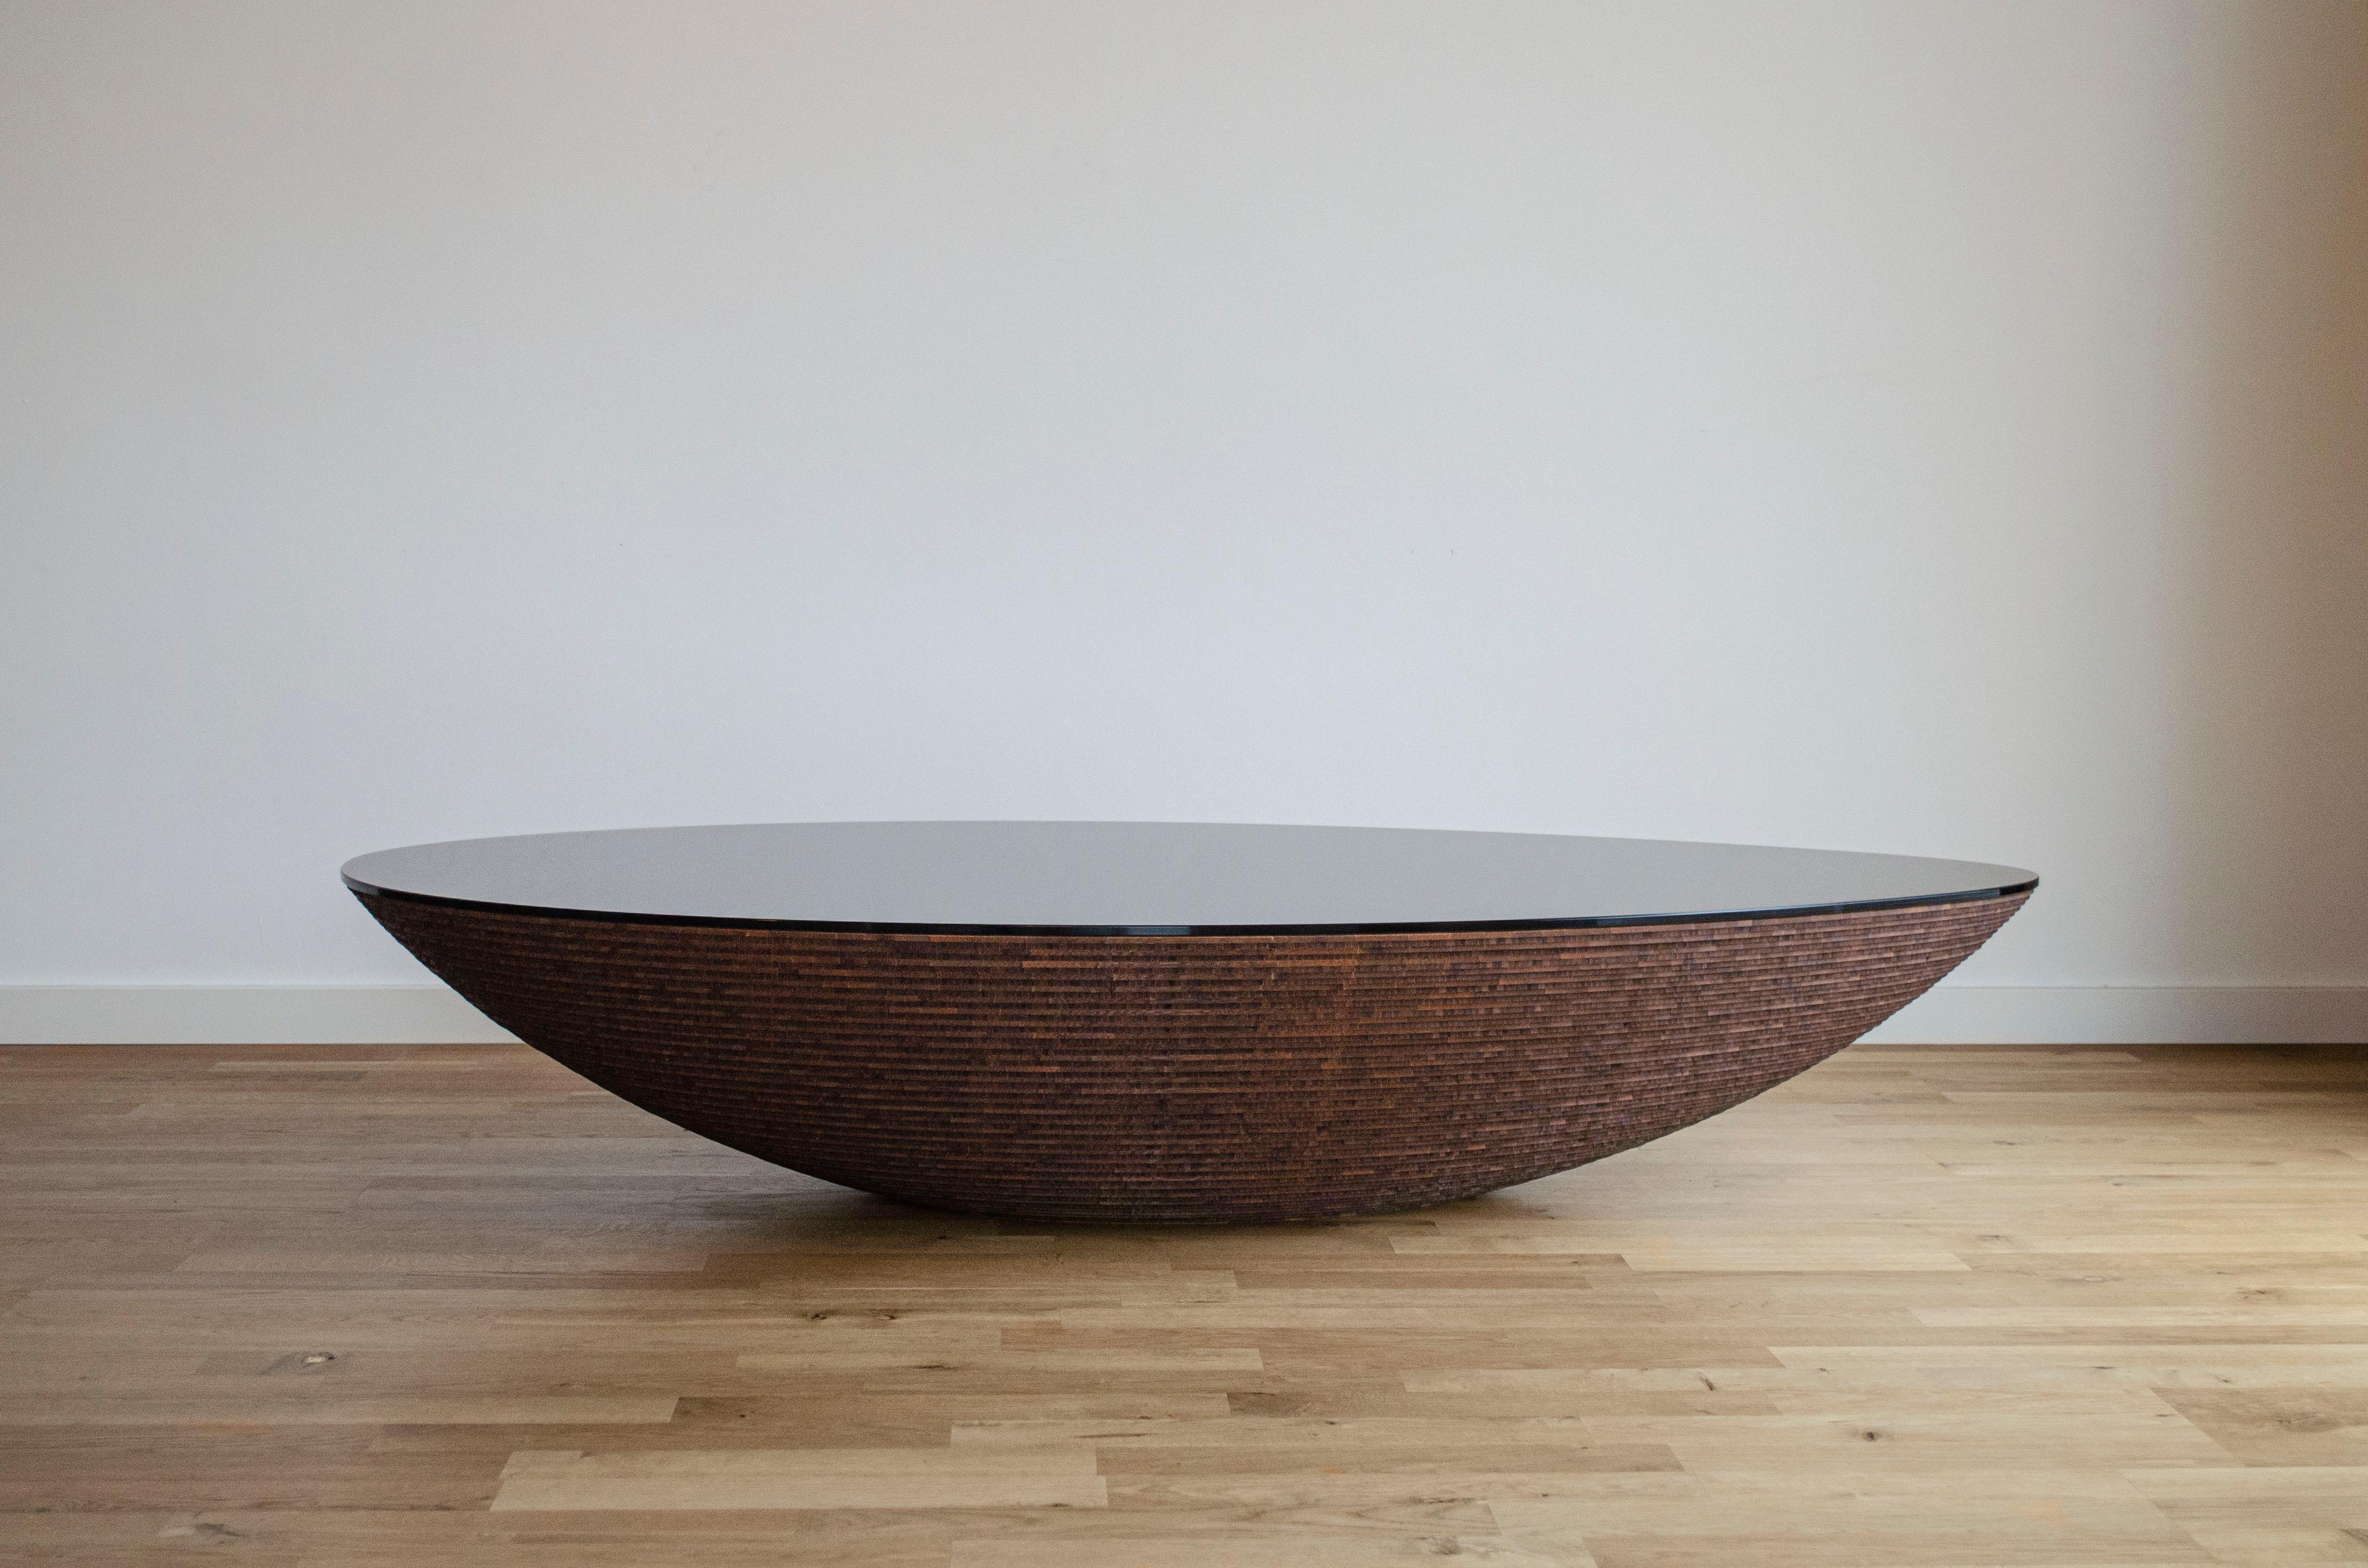 Stratum Saxum Bamboo Coffee Table III by Daan De Wit
Limited Edition of 18
Dimensions: D 90 x W 160 x H 30 cm.
Materials: Bamboo.

Sustainable in technique, material, and production.
Stratum Saxum is a collection based on the same technique as the